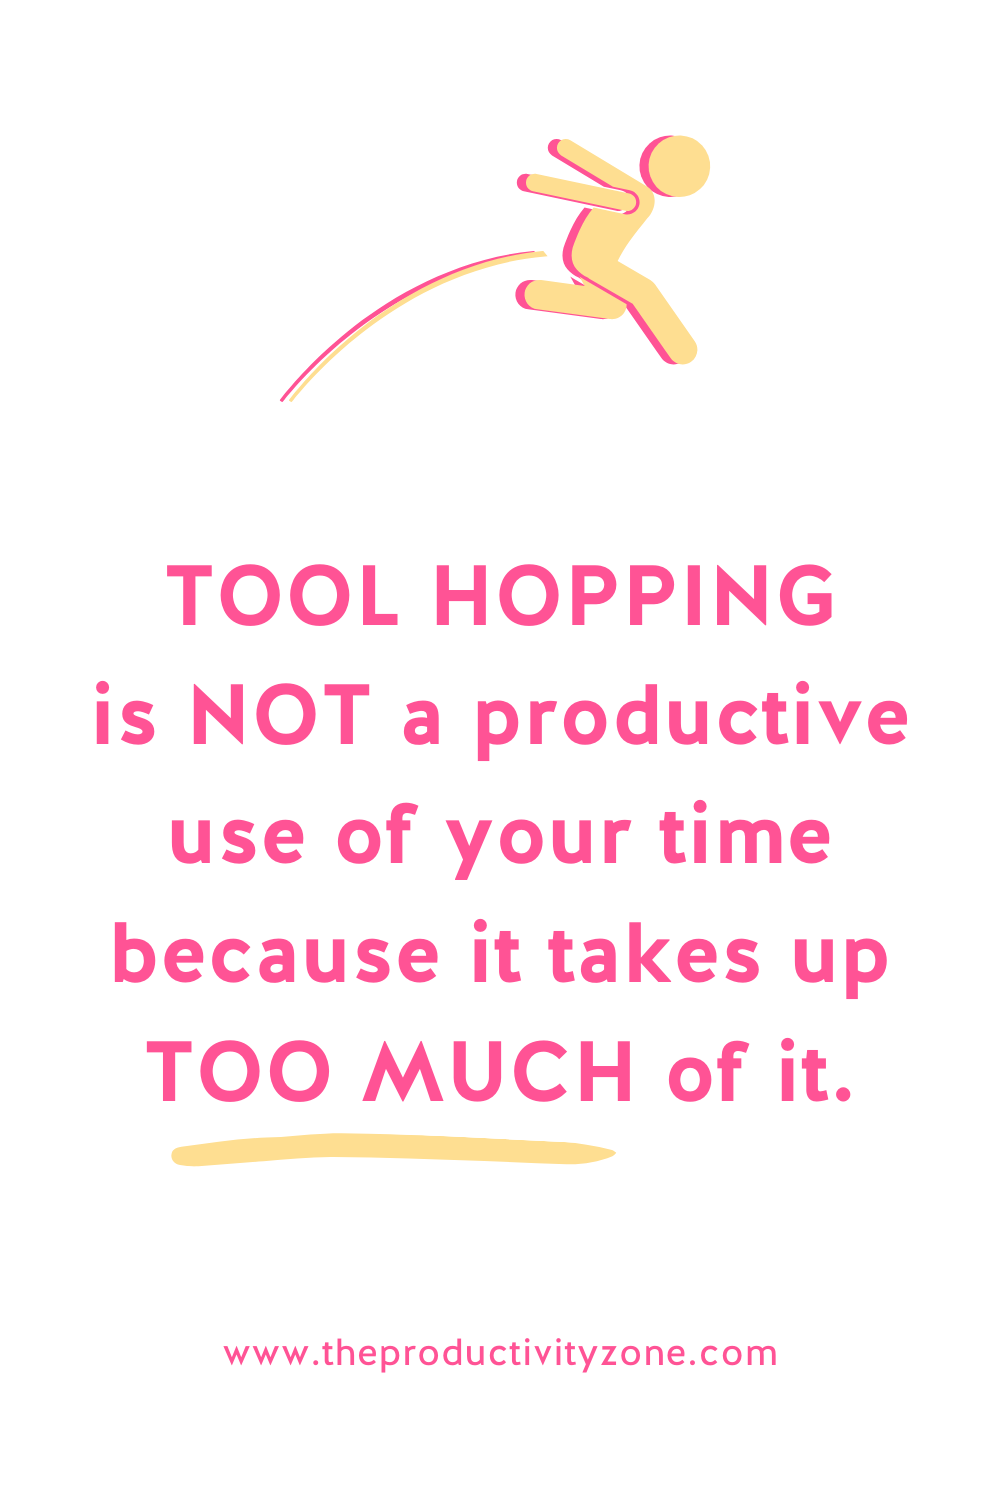 Text graphic featuring hot pink text on a white background. The text reads: "TOOL HOPPING is NOT a productive use of your time because it takes up TOO MUCH of it." There is also a bright yellow and hot pink stick figure person hopping from left to right above the text.